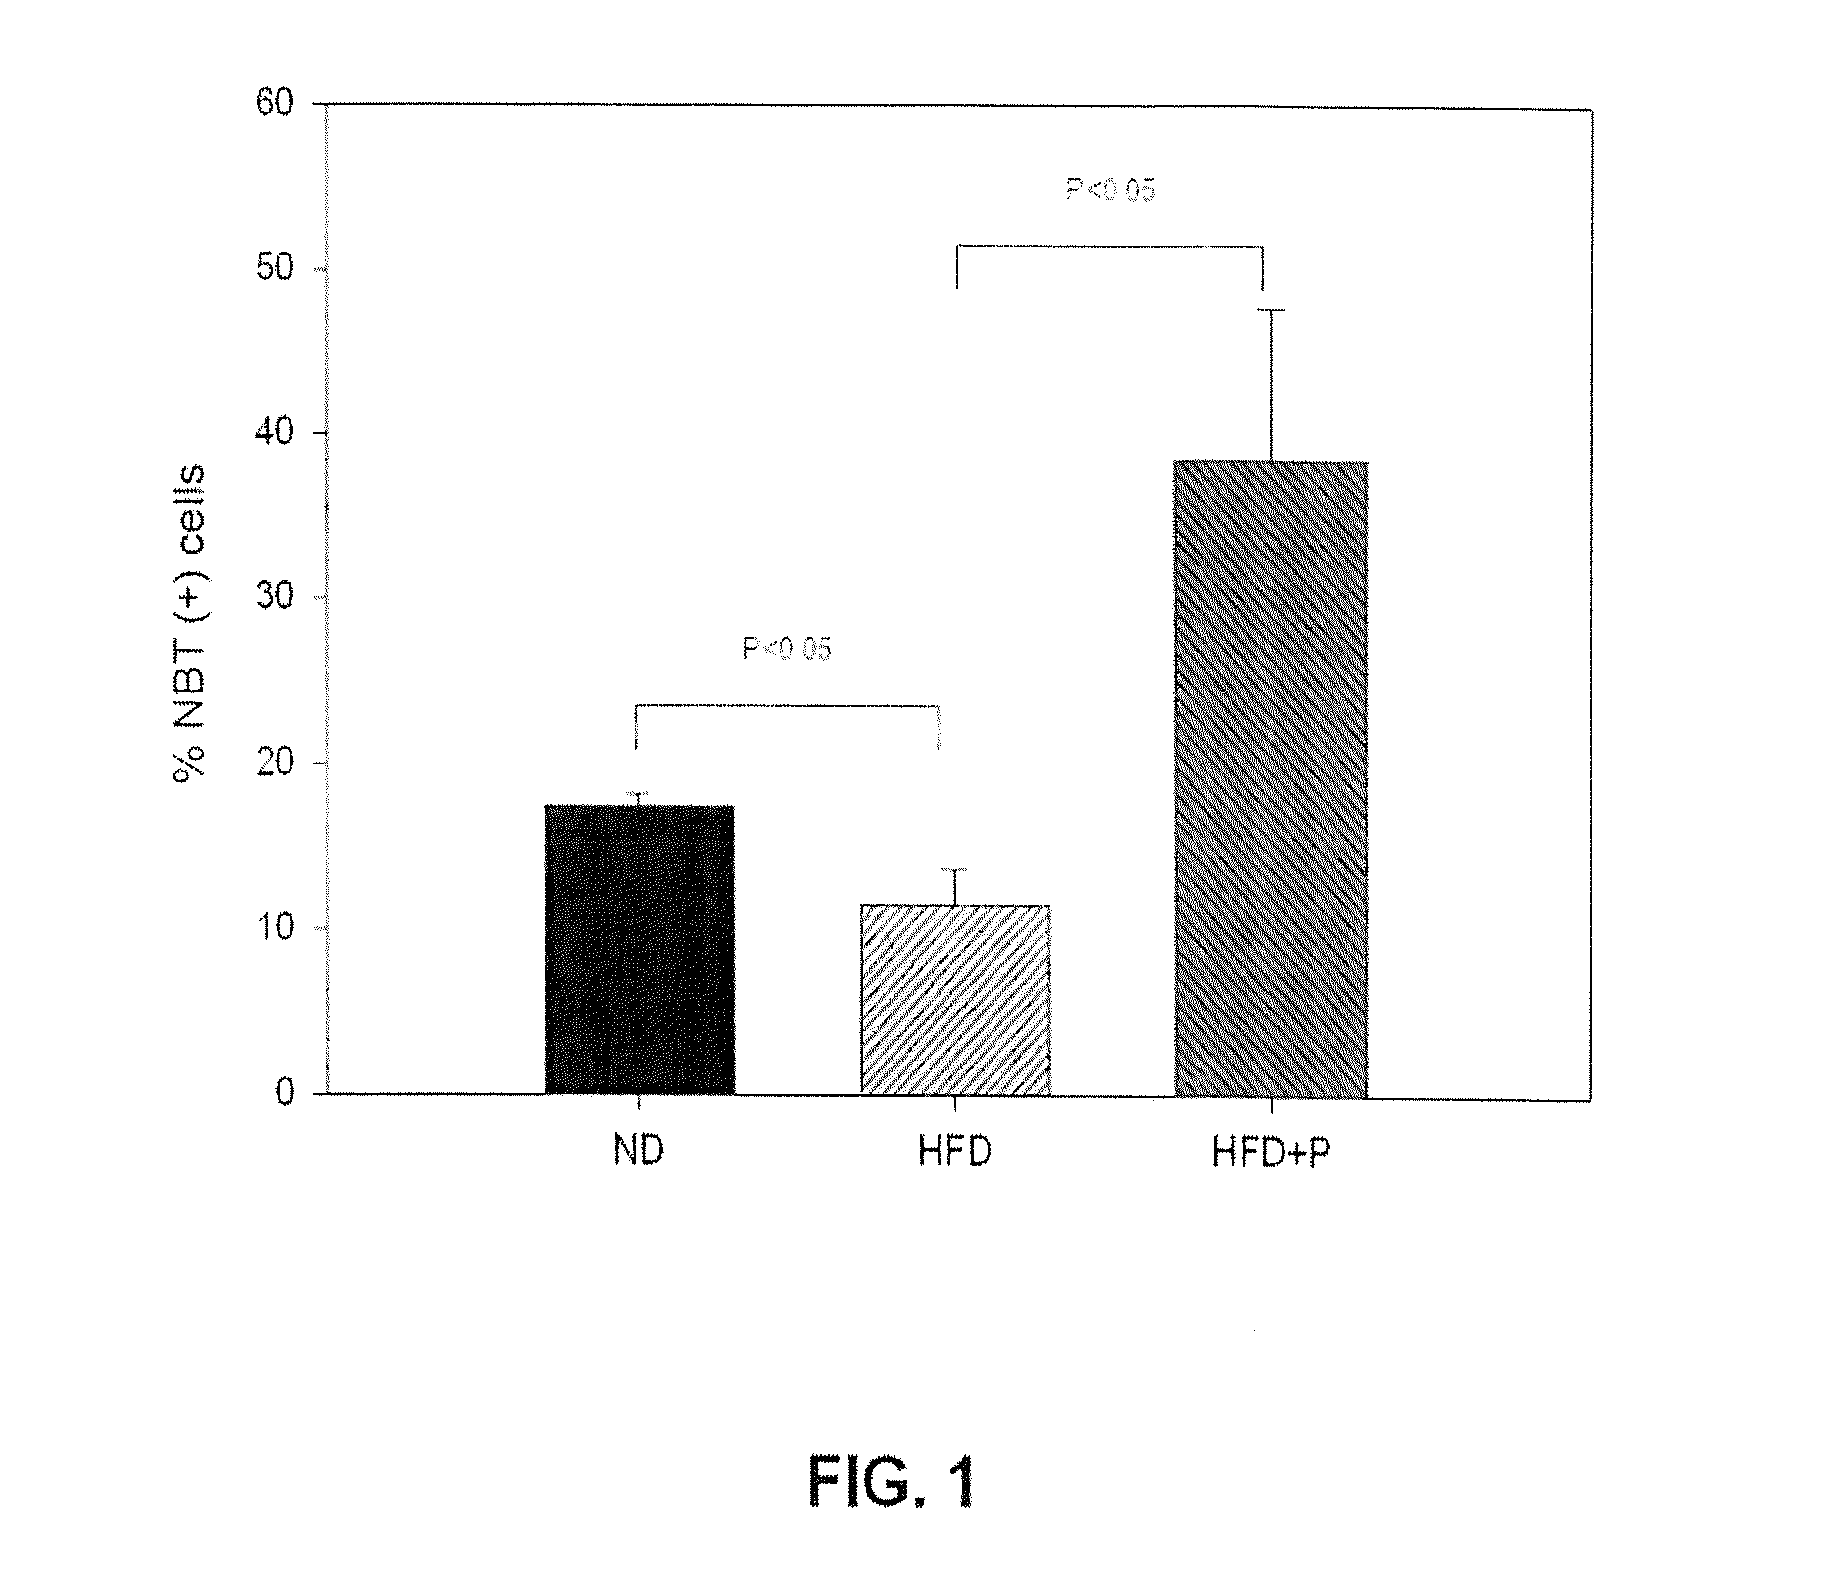 Bifidobacterium cect 7765 and use thereof in the prevention and/or treatment of overweight, obesity and associated pathologies